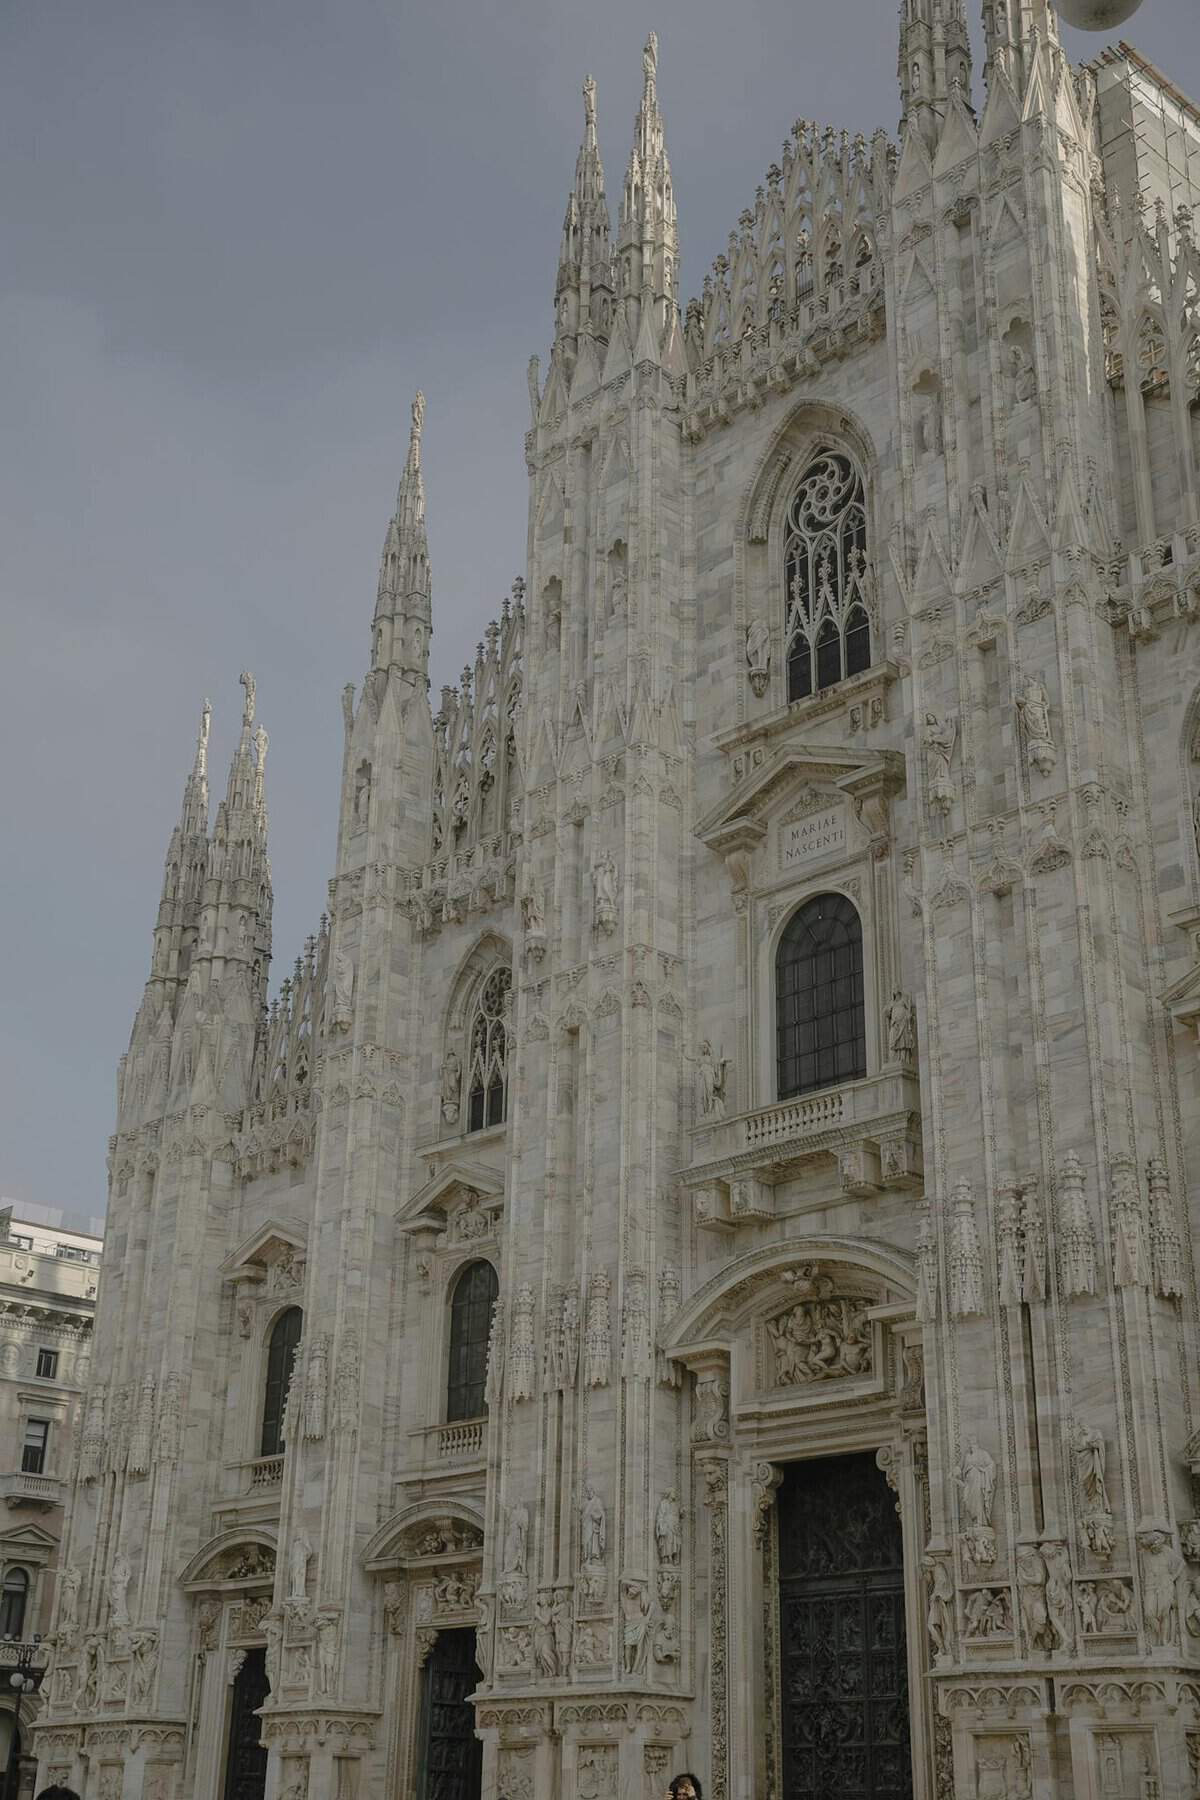 Low Angle Shot of the Milan Cathedral, Milan, Italy